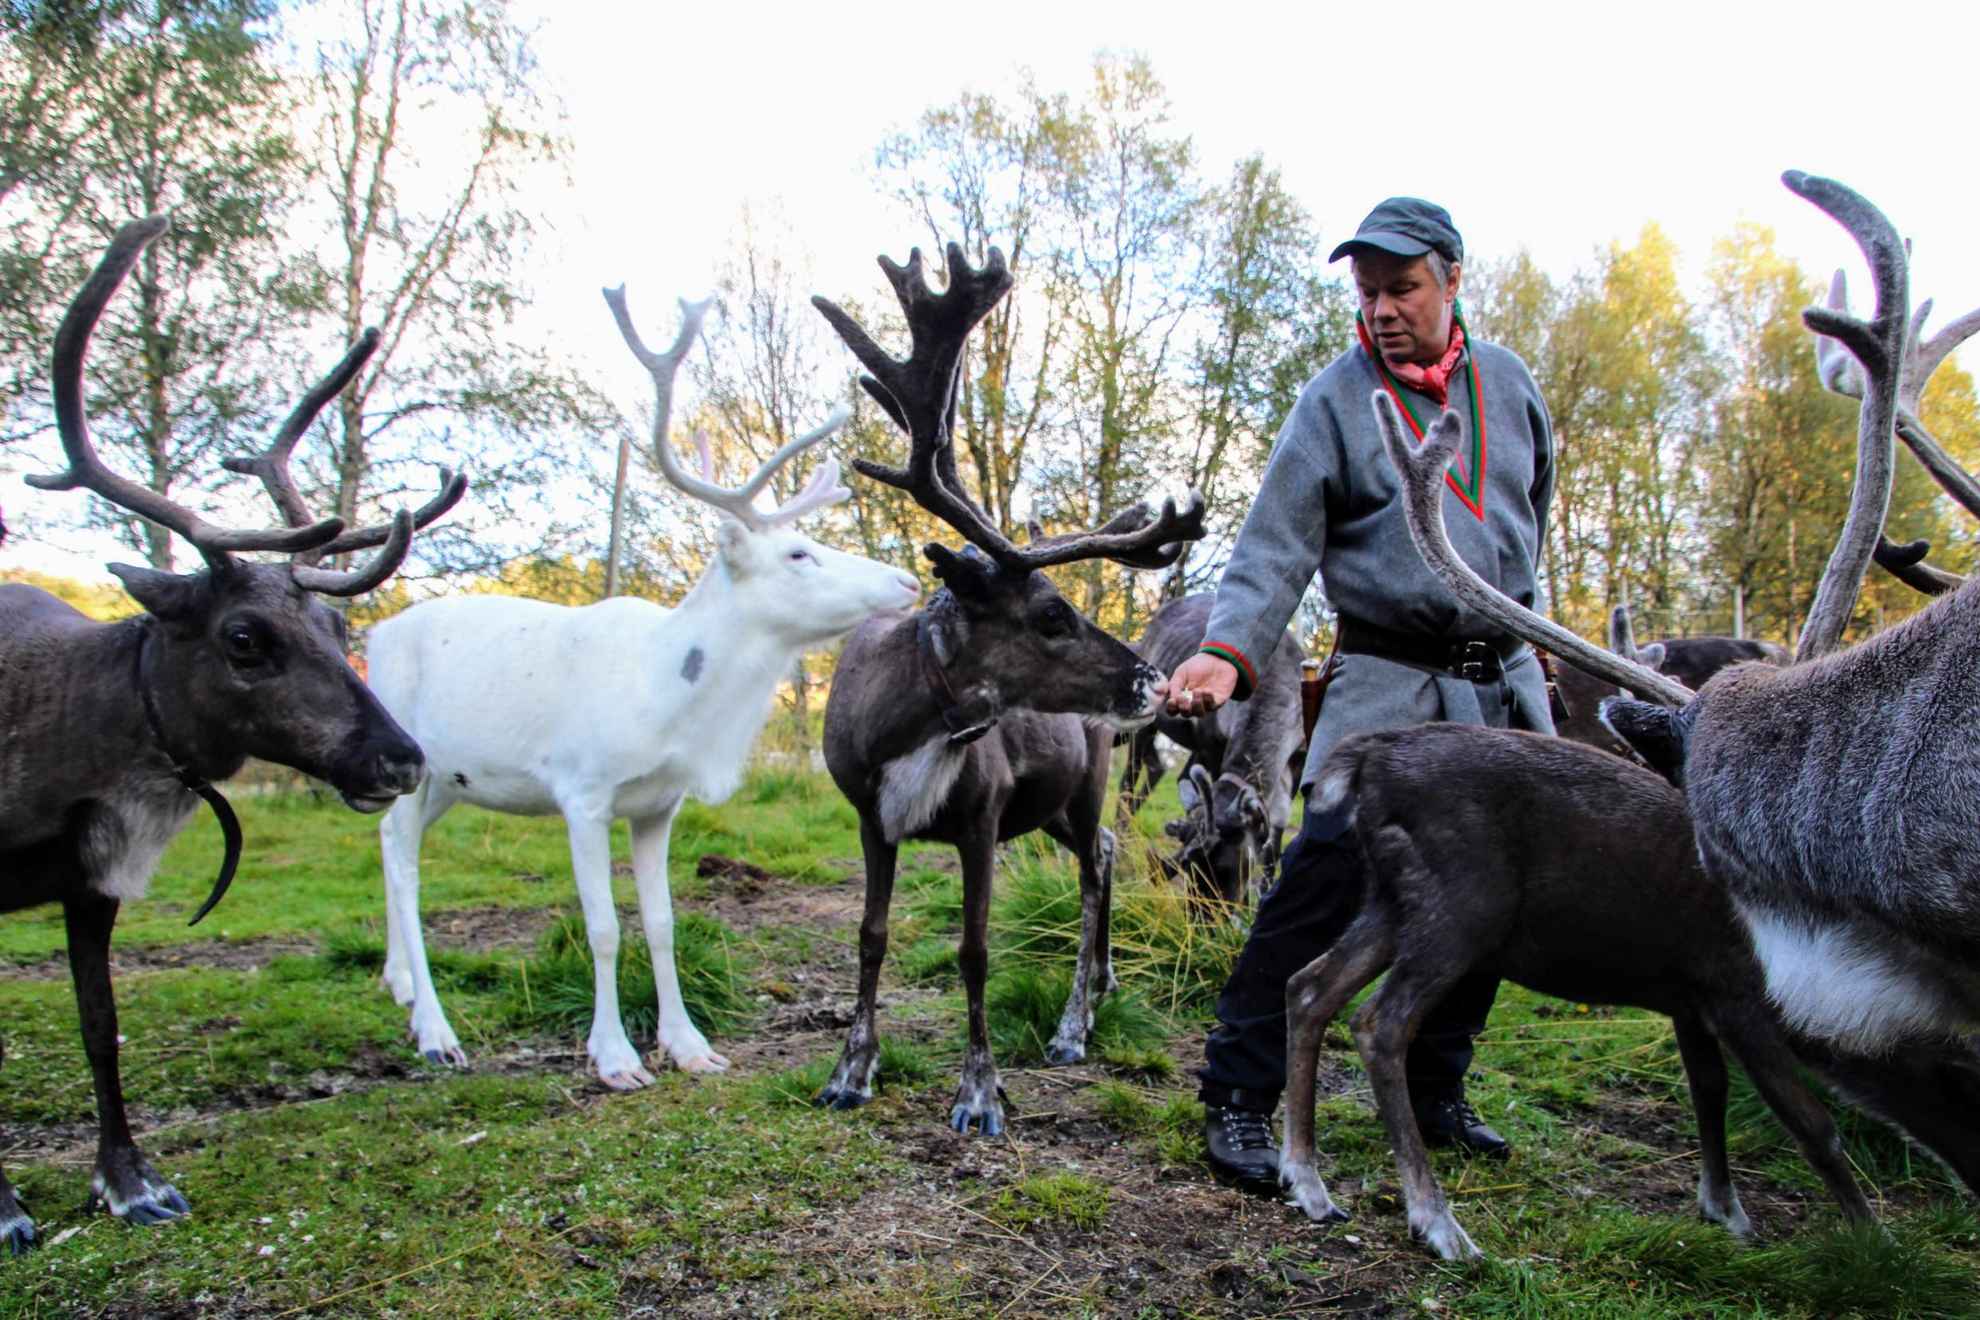 Sami culture and reindeer experiences